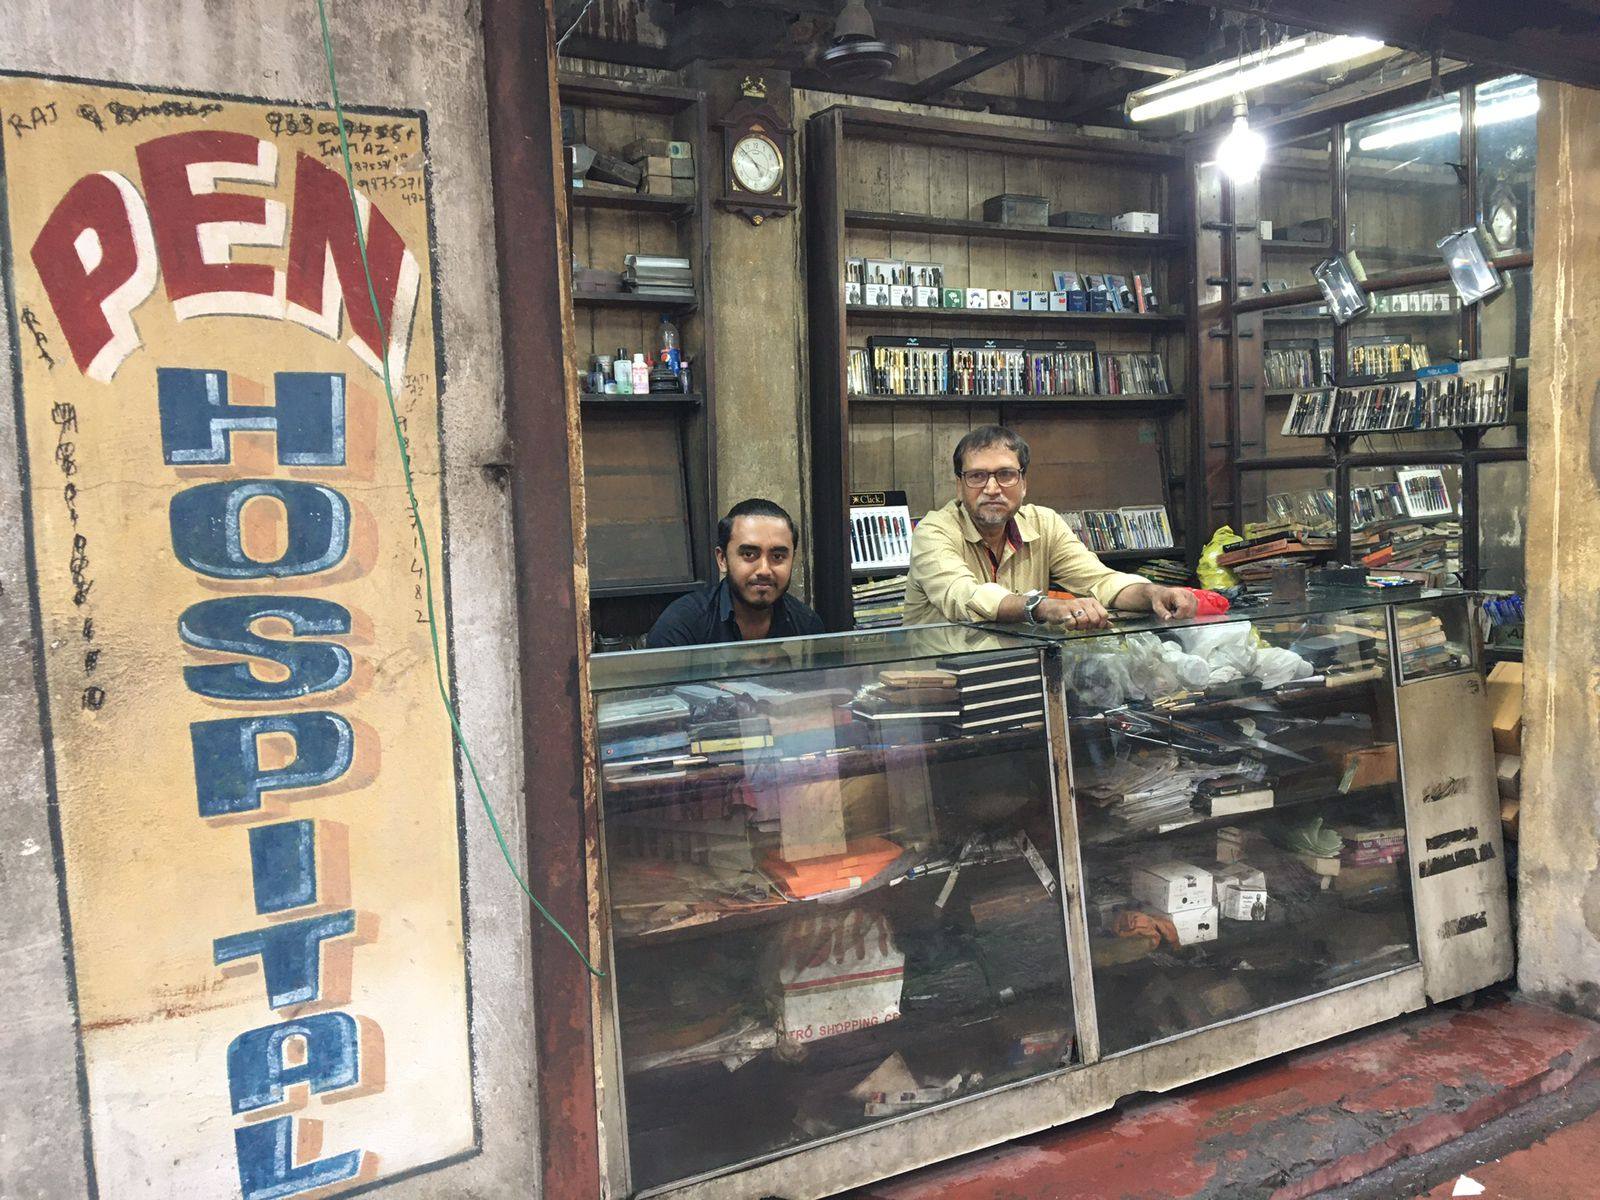 Shahbaz Reyaz and his uncle Mohammad Imtiaz run the Pen Hospital store in Kolkata, which sells and repairs pens of all types for customers from around the world. Photo: handout